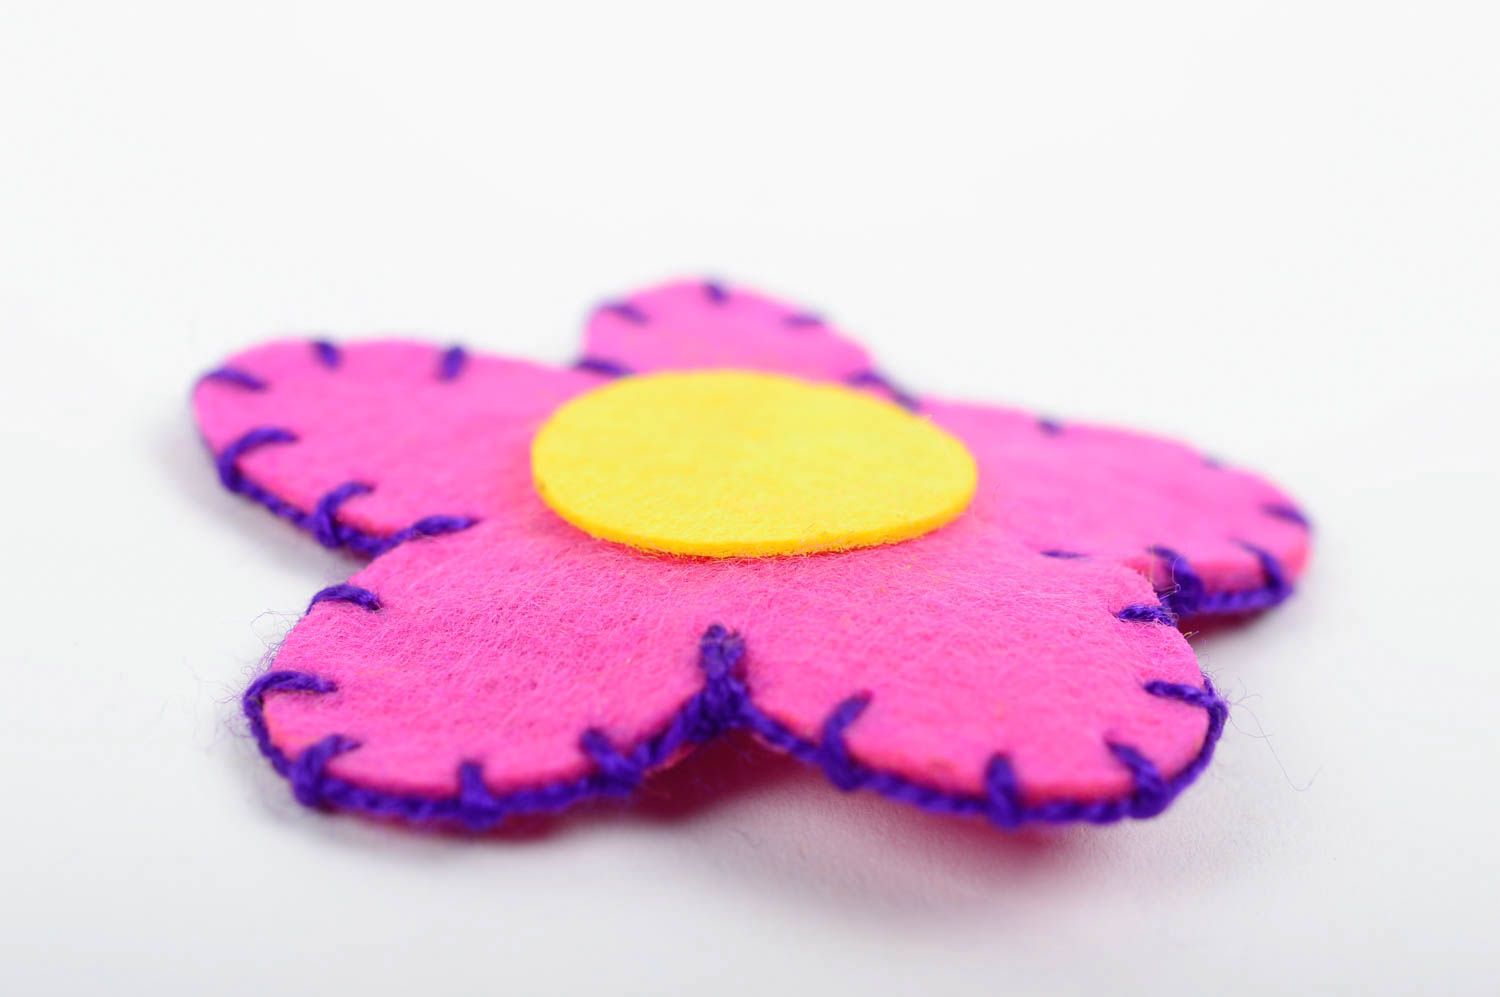 Handmade unique wool felted barrette designer hair accessory hairpin for girls photo 2